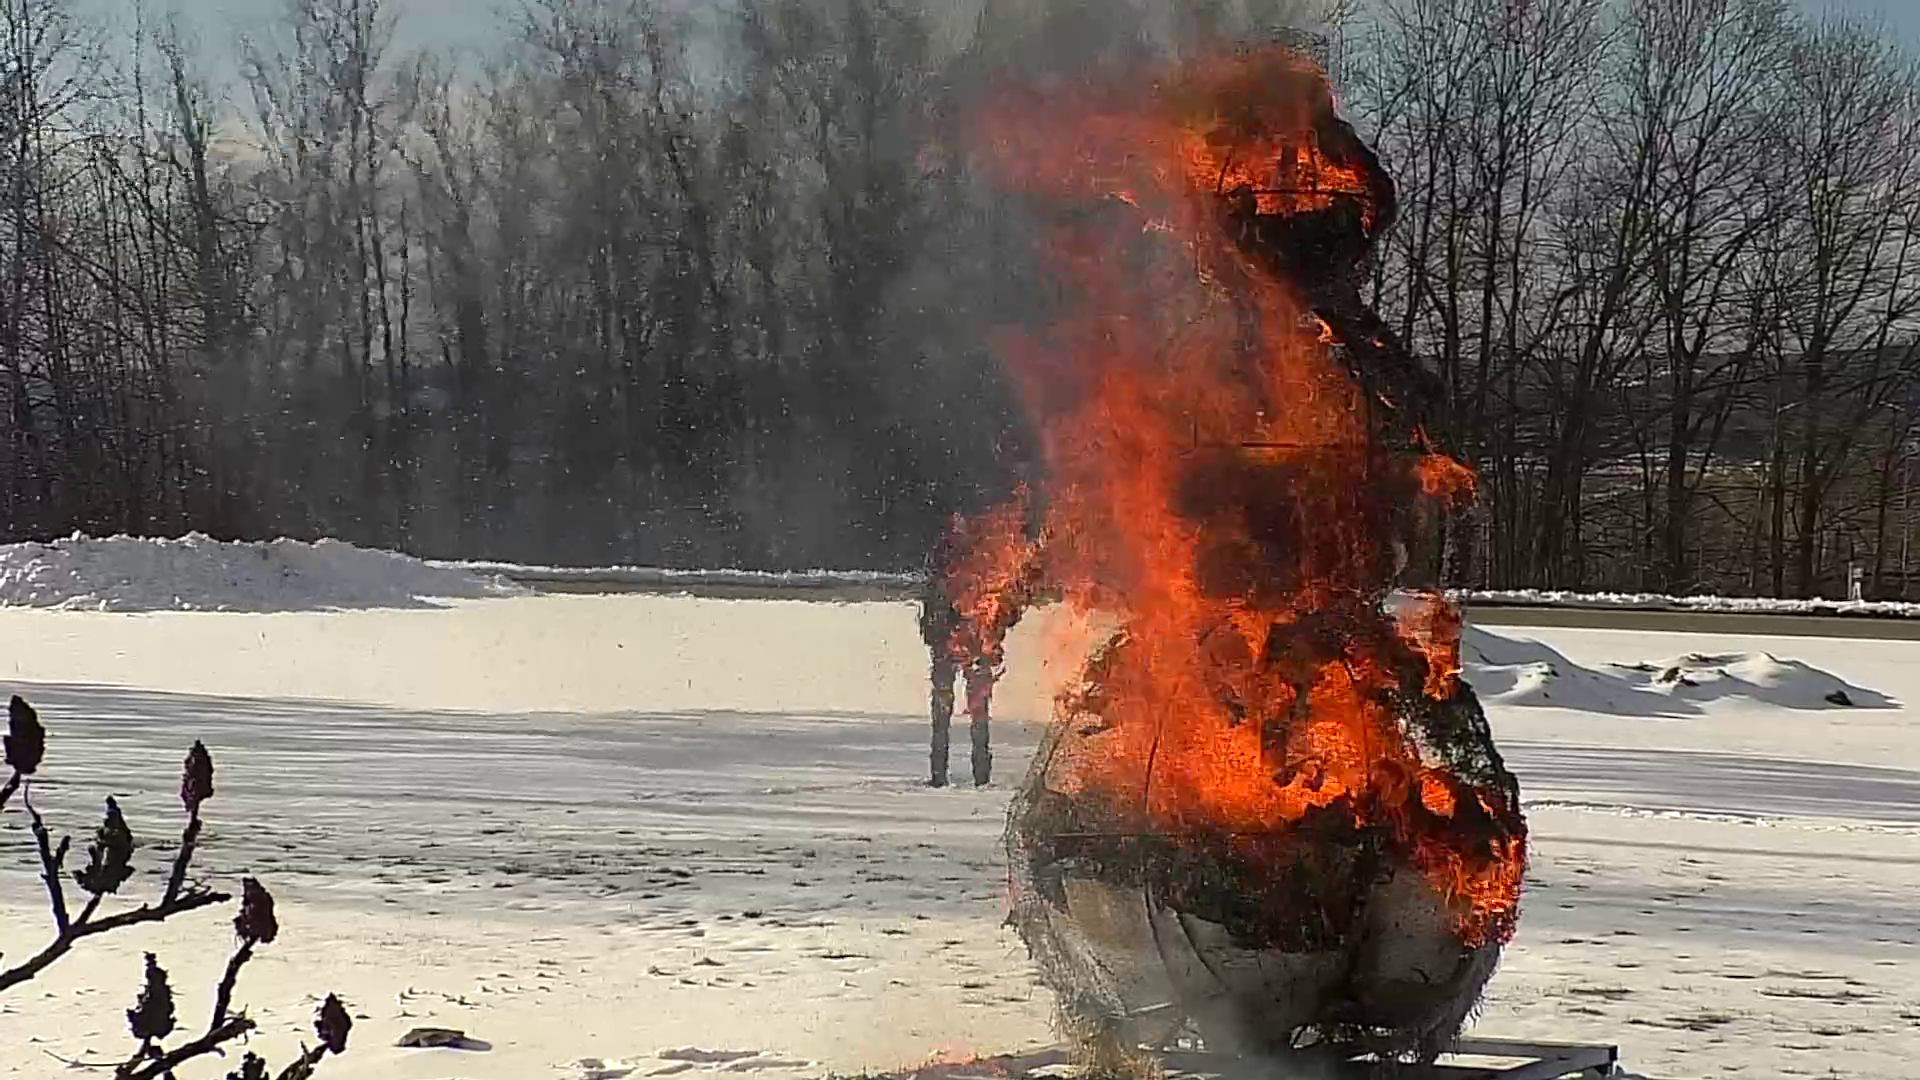 Postponed twice, LSSU students finally get a chance to burn a snowman